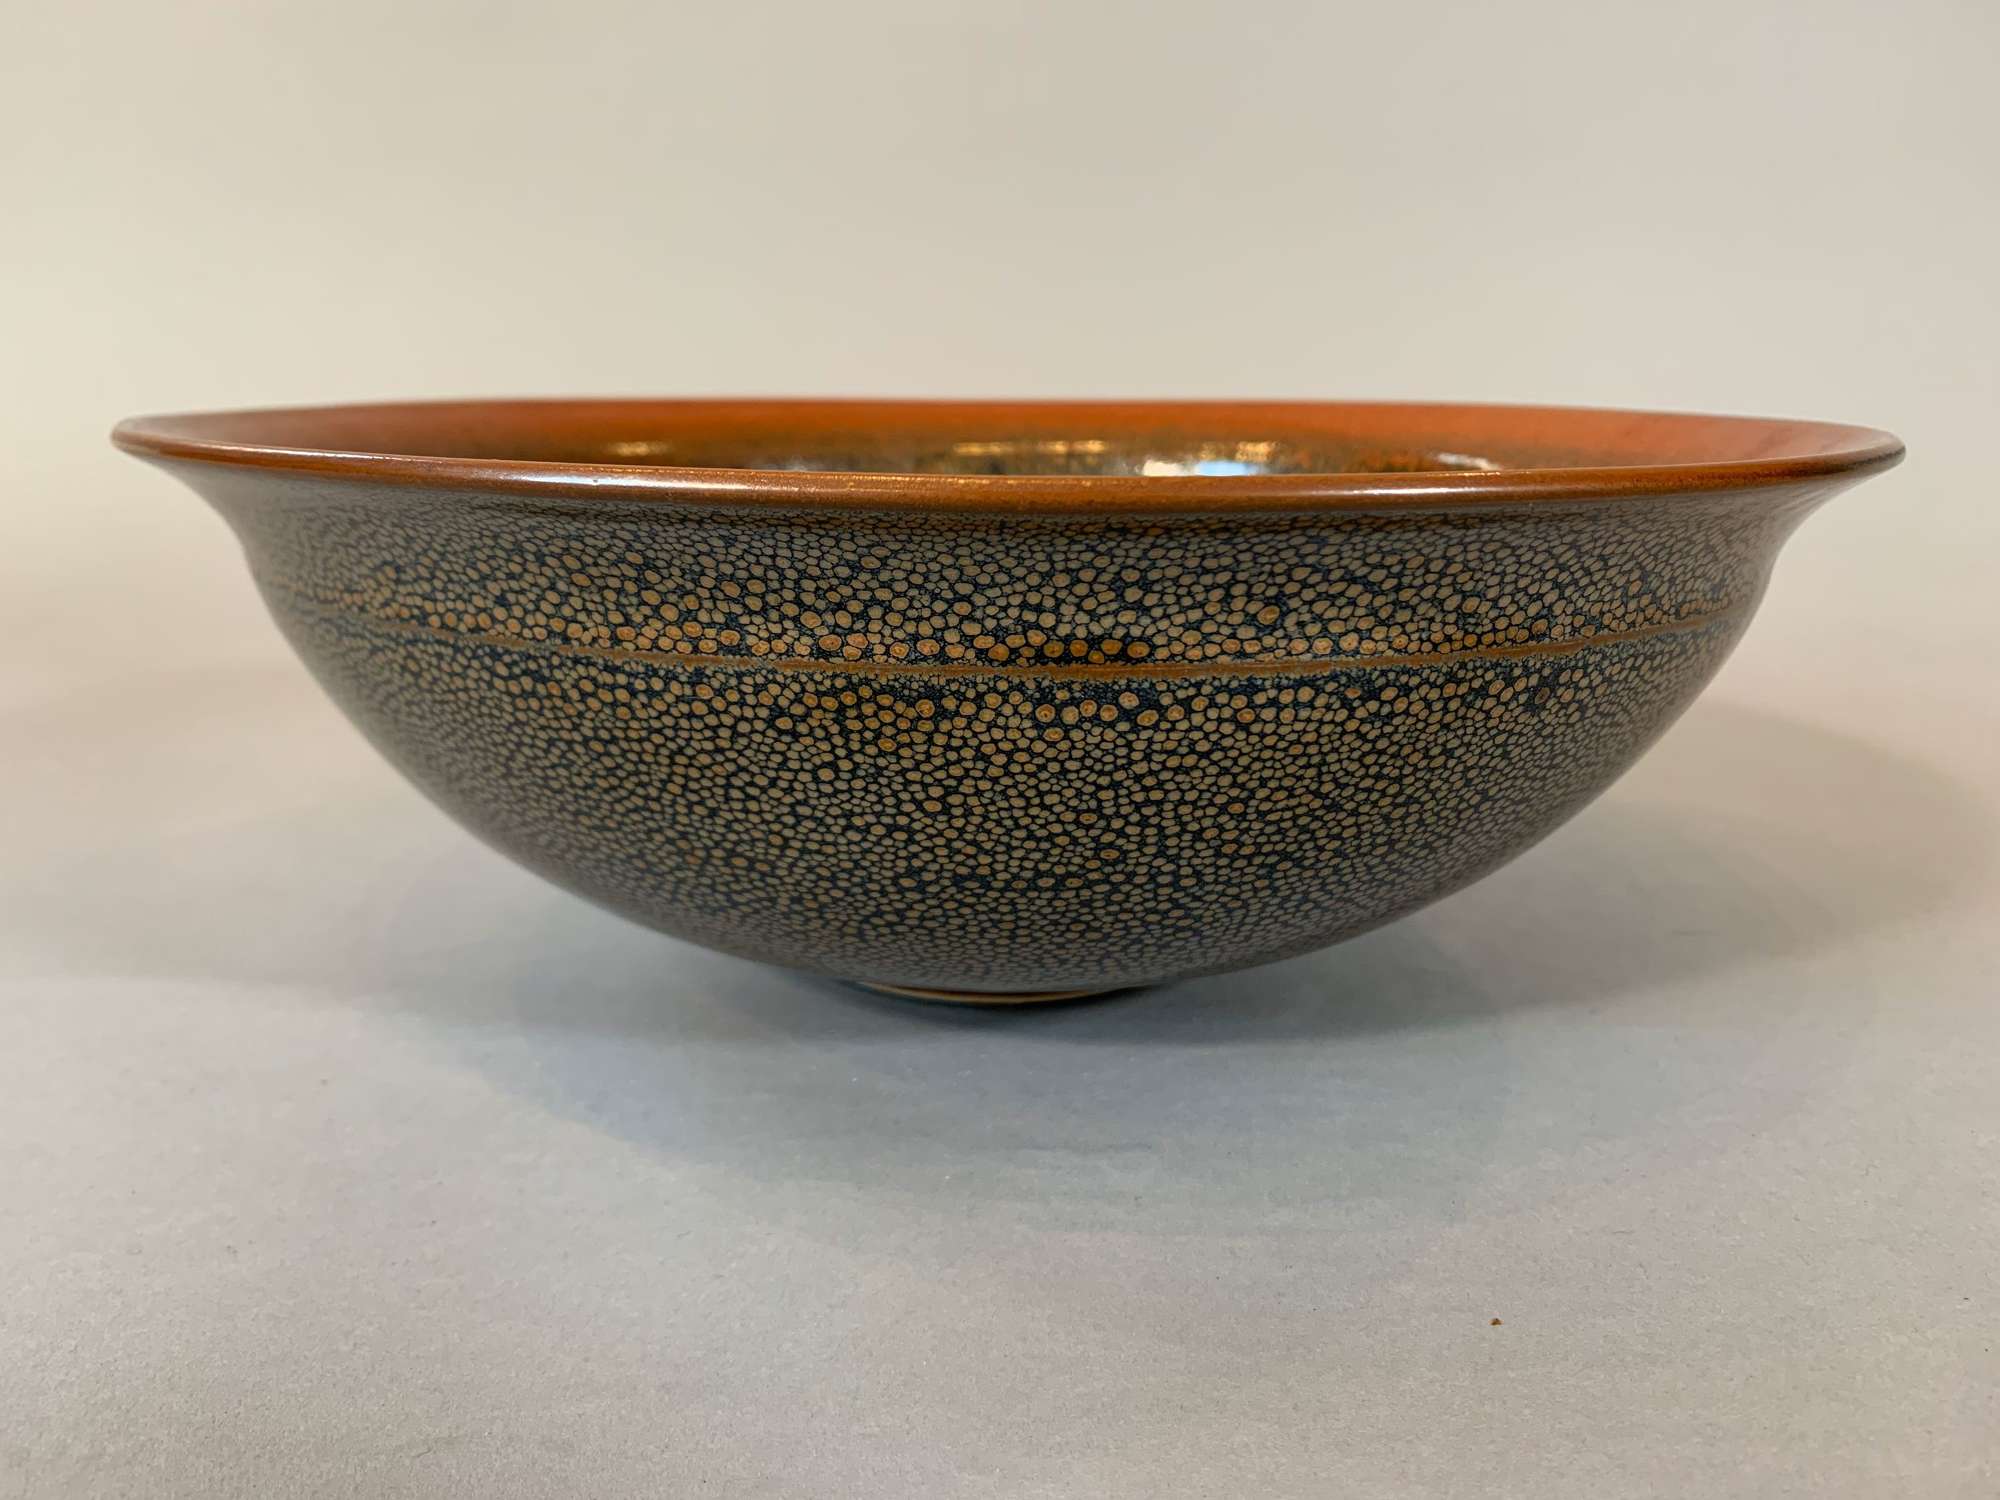 Oil spot decorated bowl